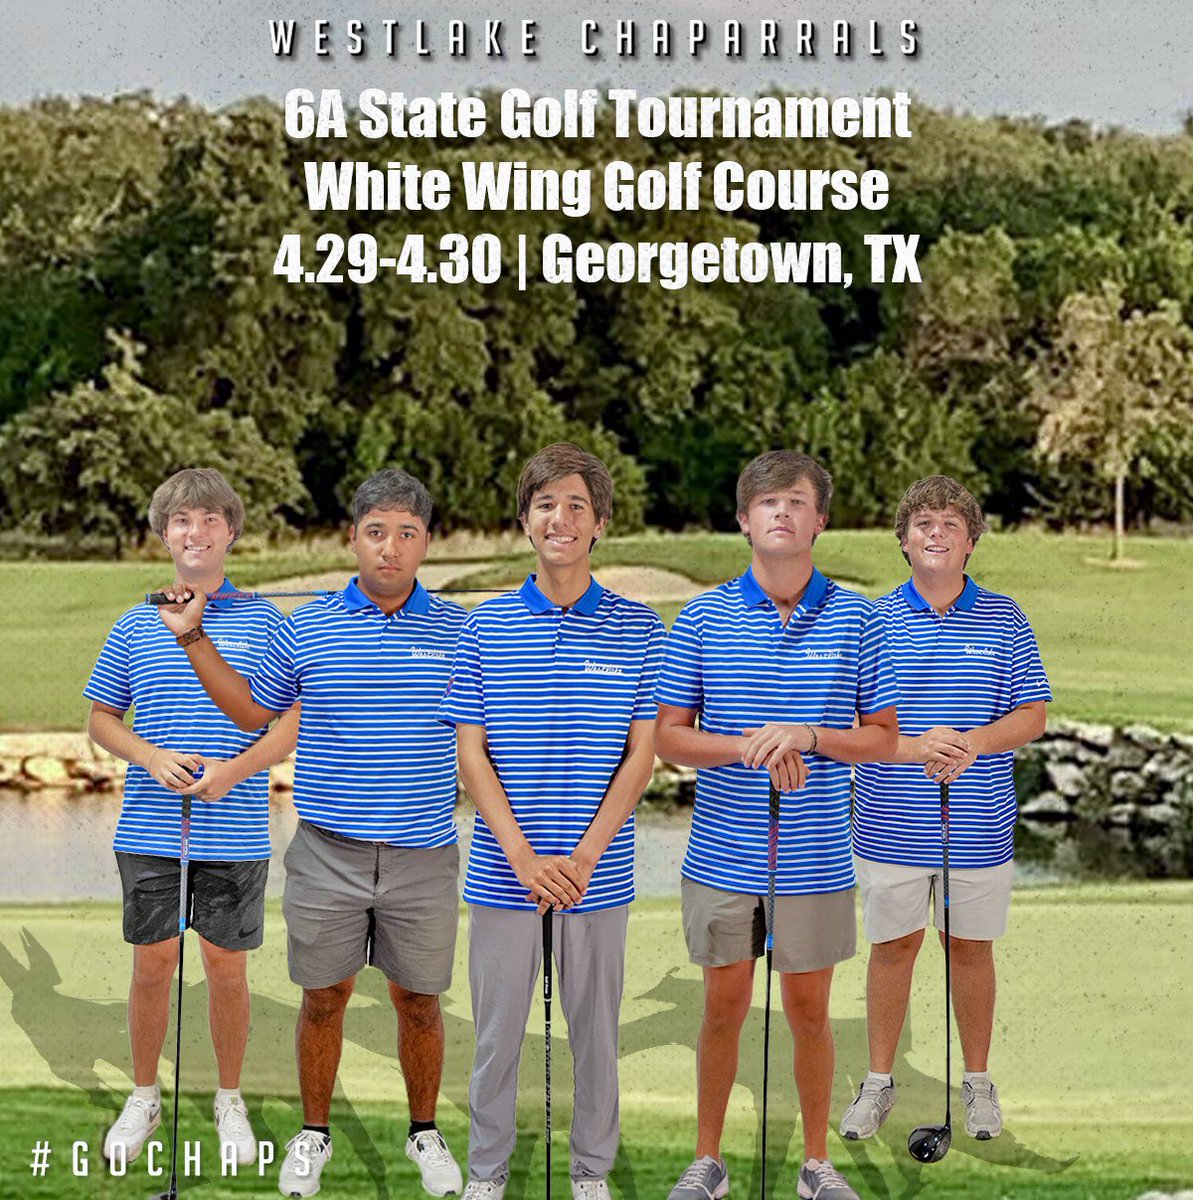 Men’s Golf returns to the 6A State Golf Tournament at White Wing Golf Course in Georgetown. First round play begins at 9am as the Chaps take aim at the program’s 7th consecutive state title. #GoChaps